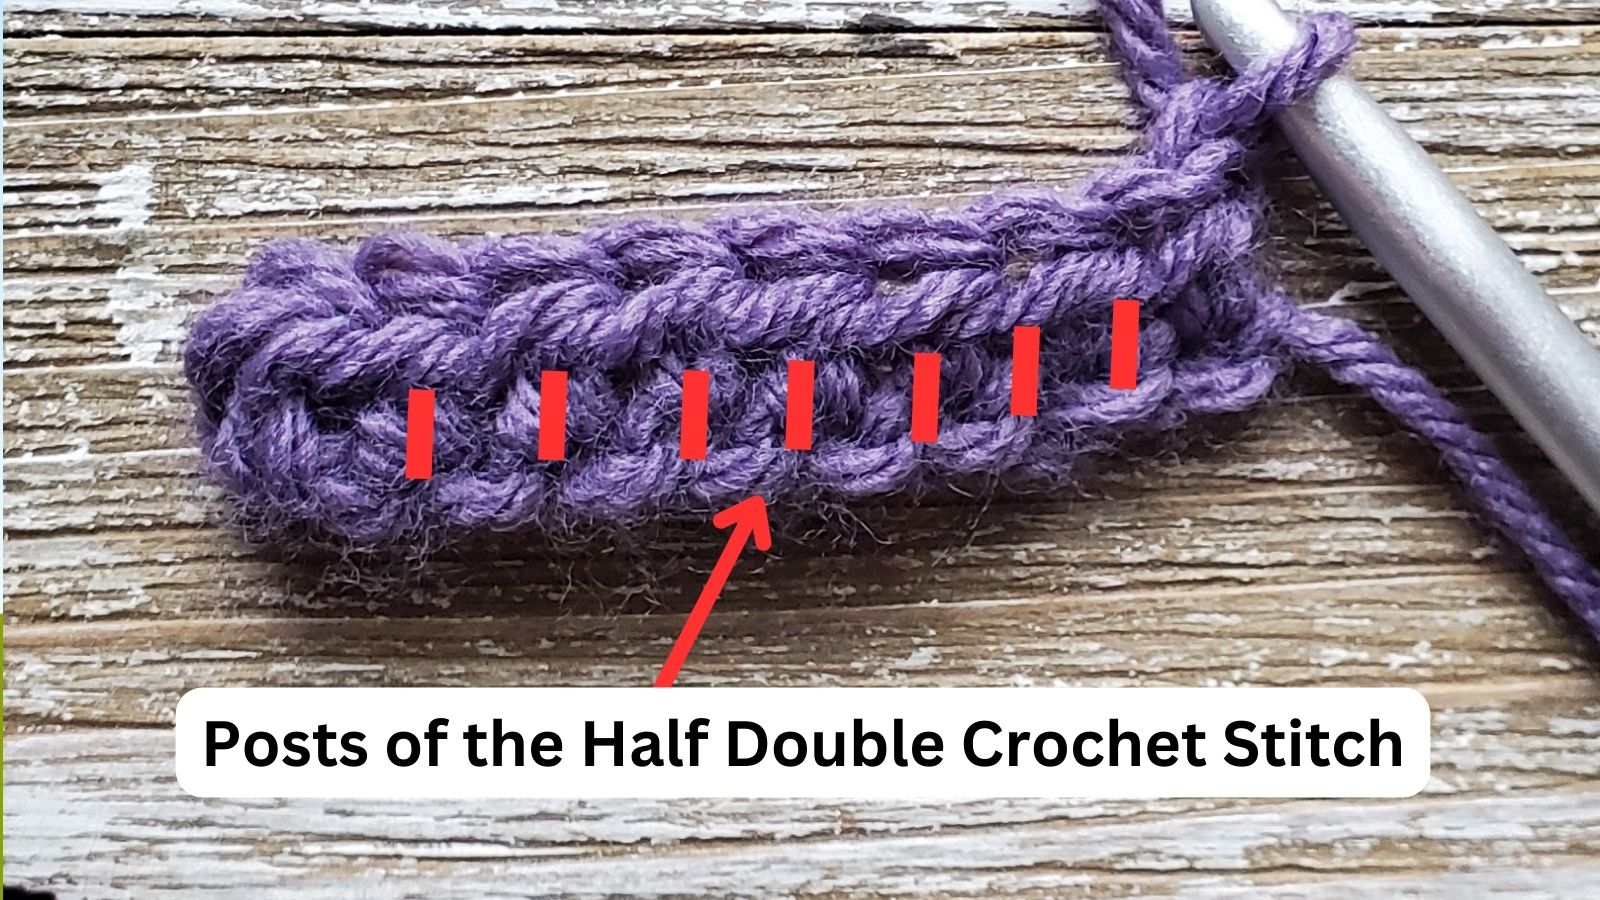 Posts of half double crochet stitches highlighted by red lines